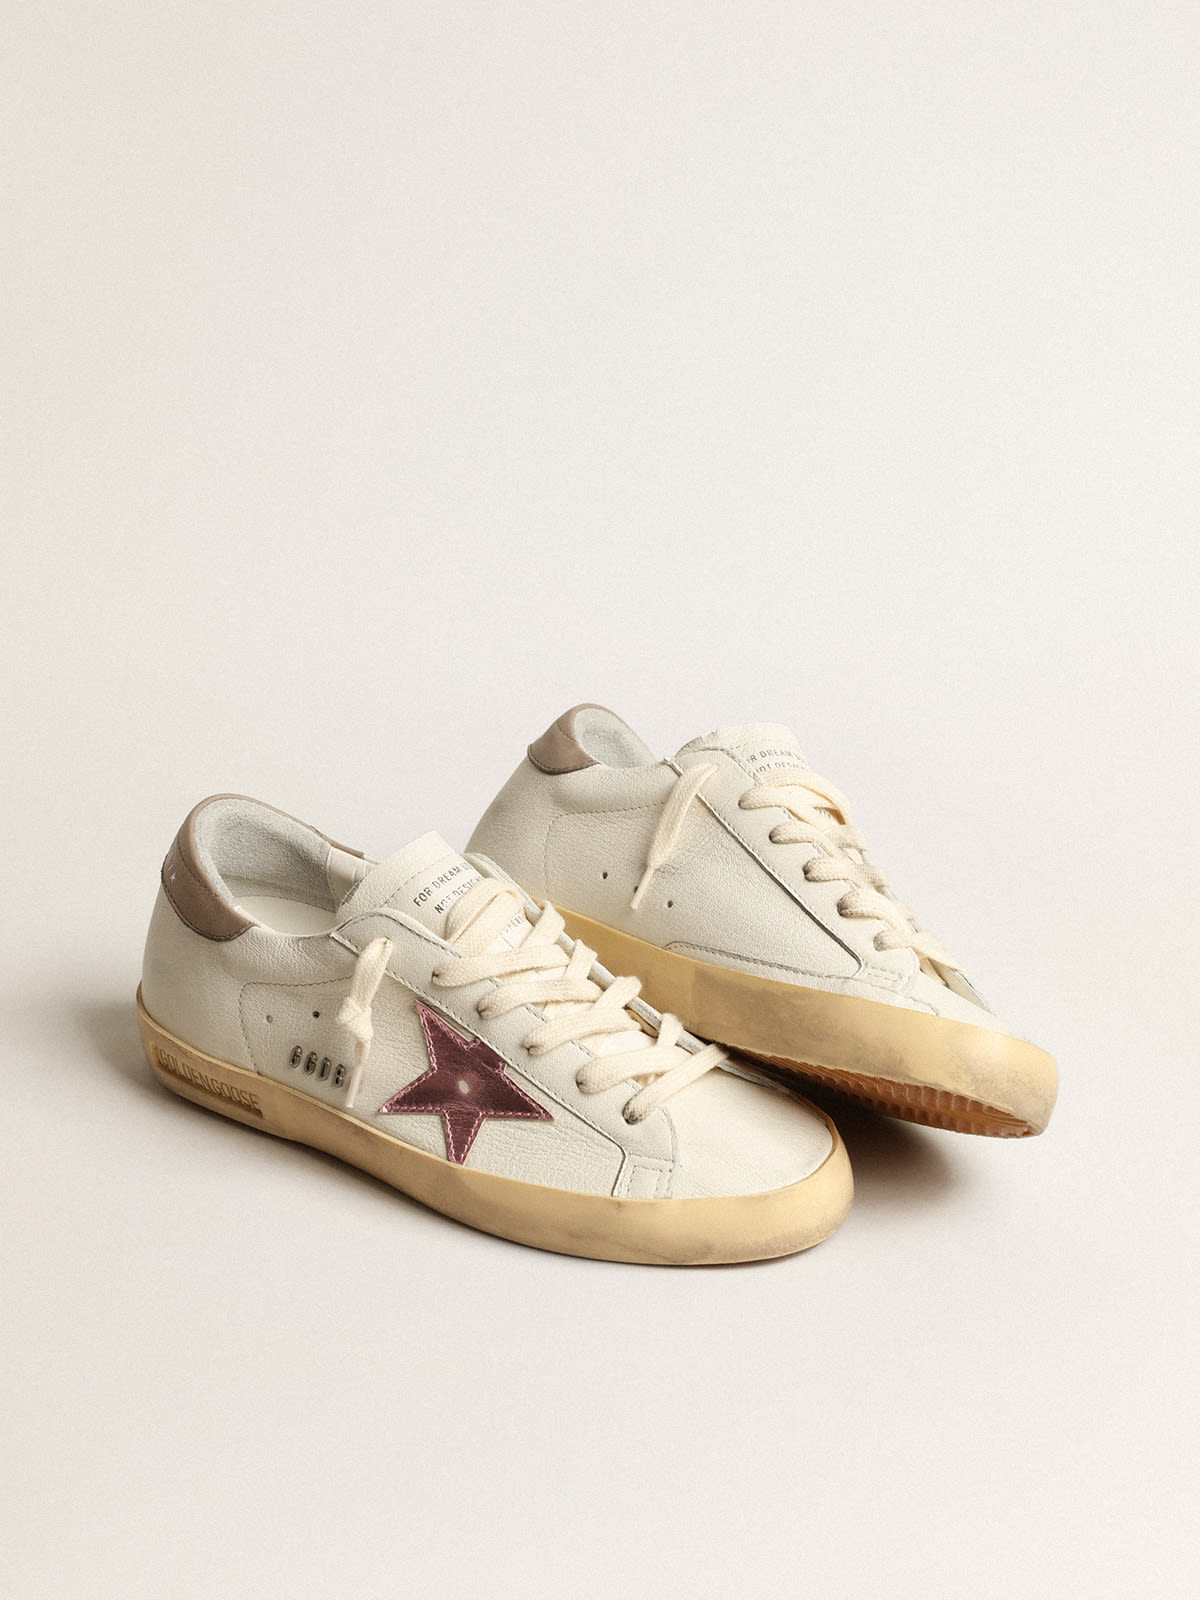 Golden Goose - Super-Star in white nappa with pink metallic leather star in 